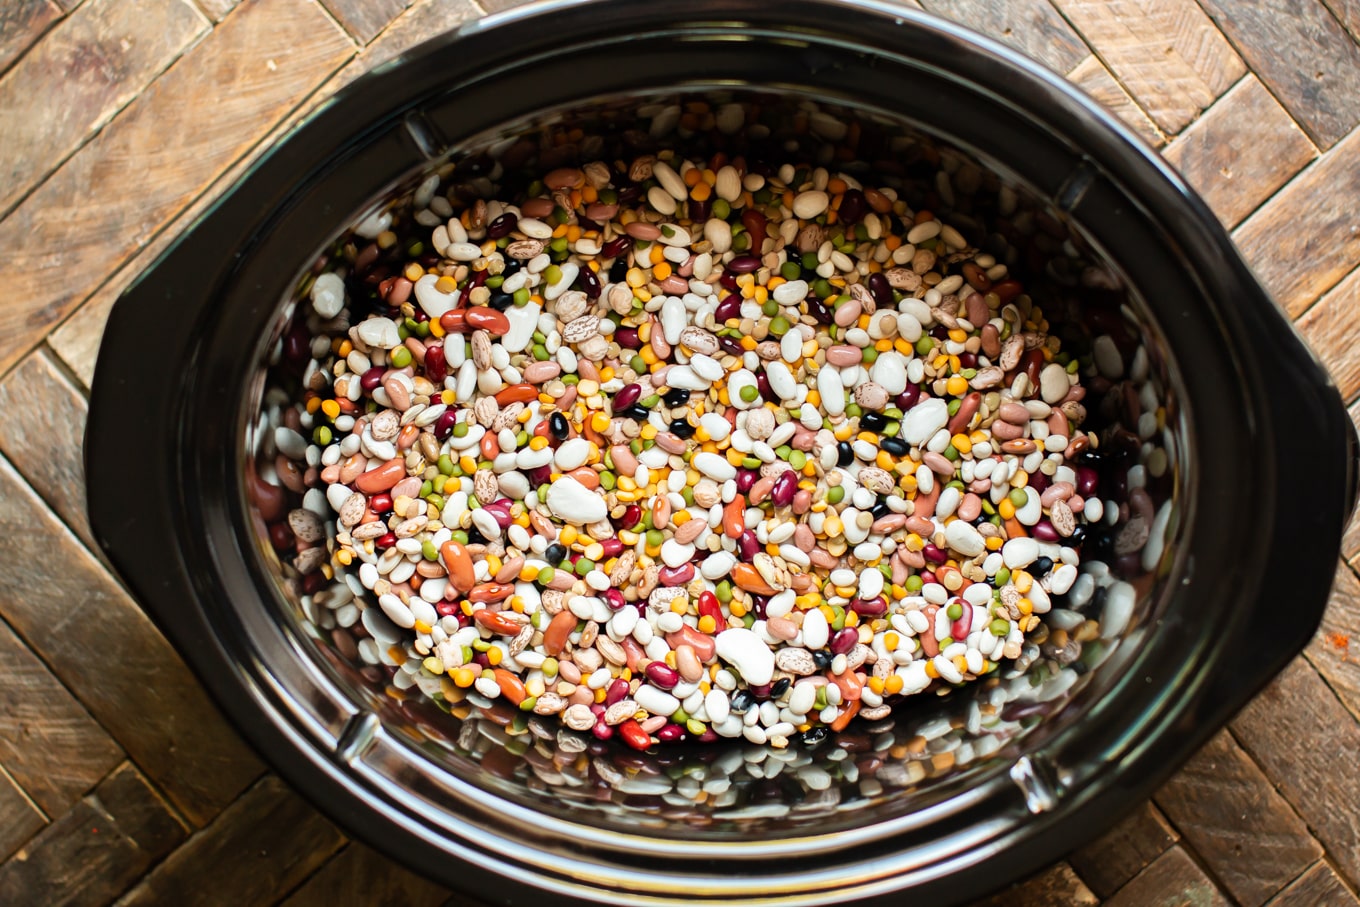 15 types of uncooked beans in a slow cooker.